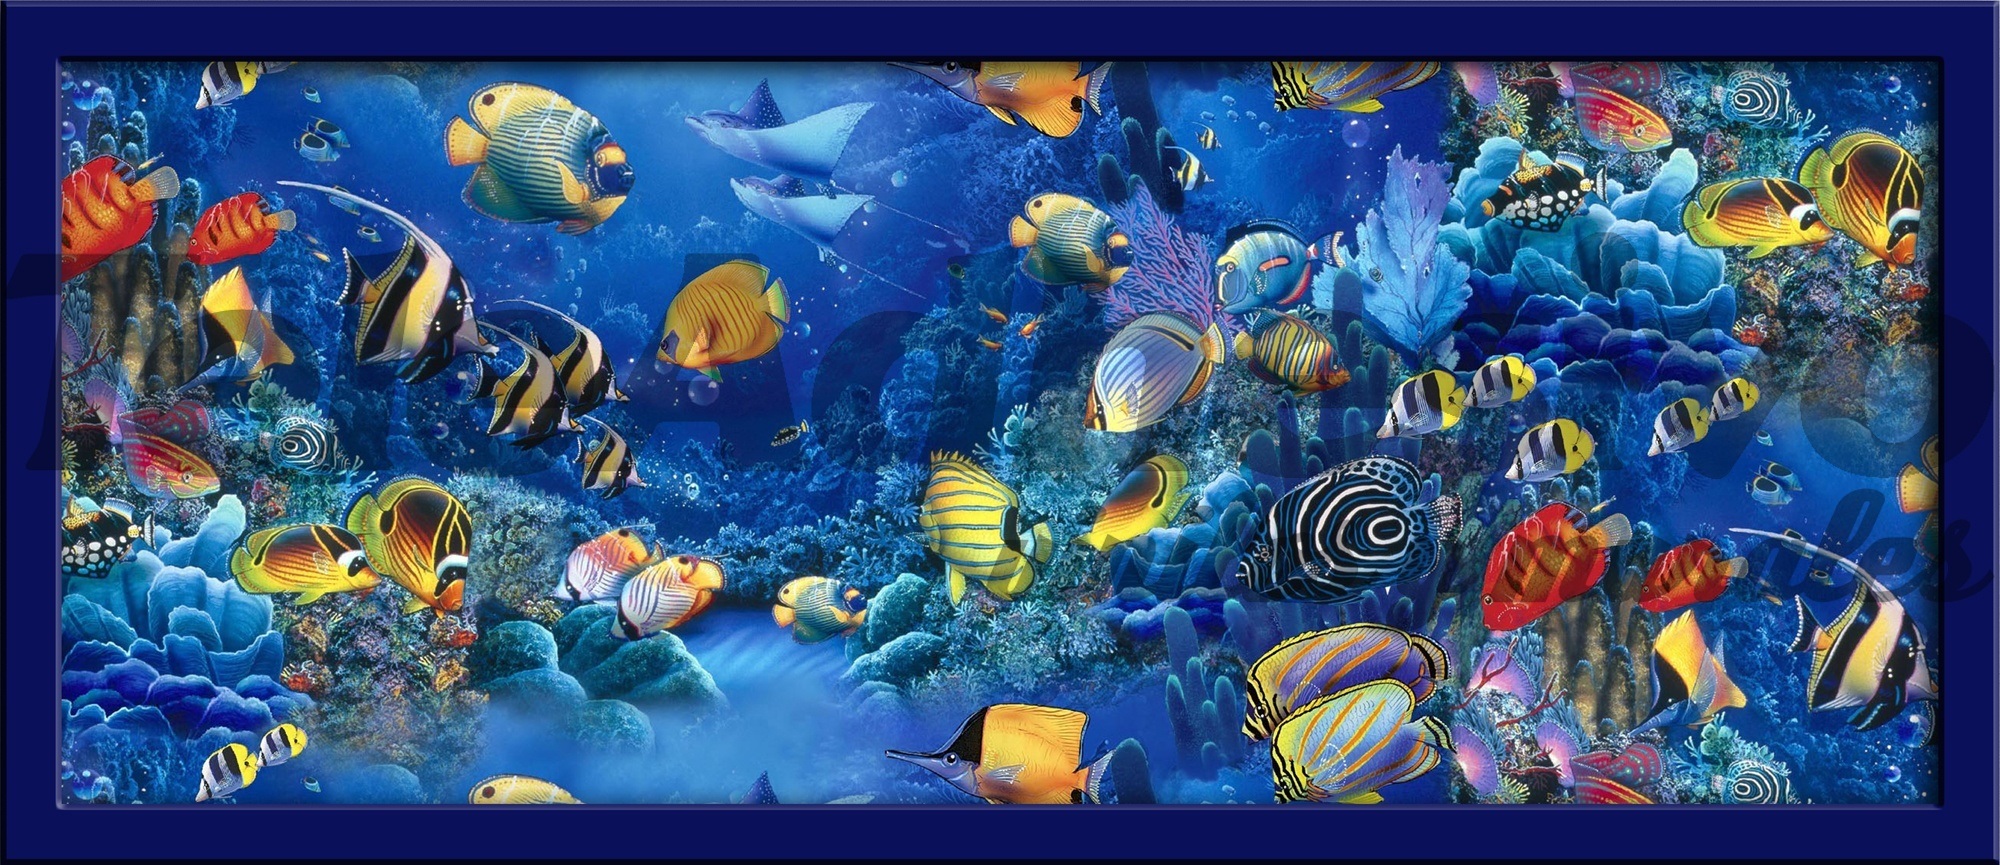 Wall Stickers: Picture Seabed